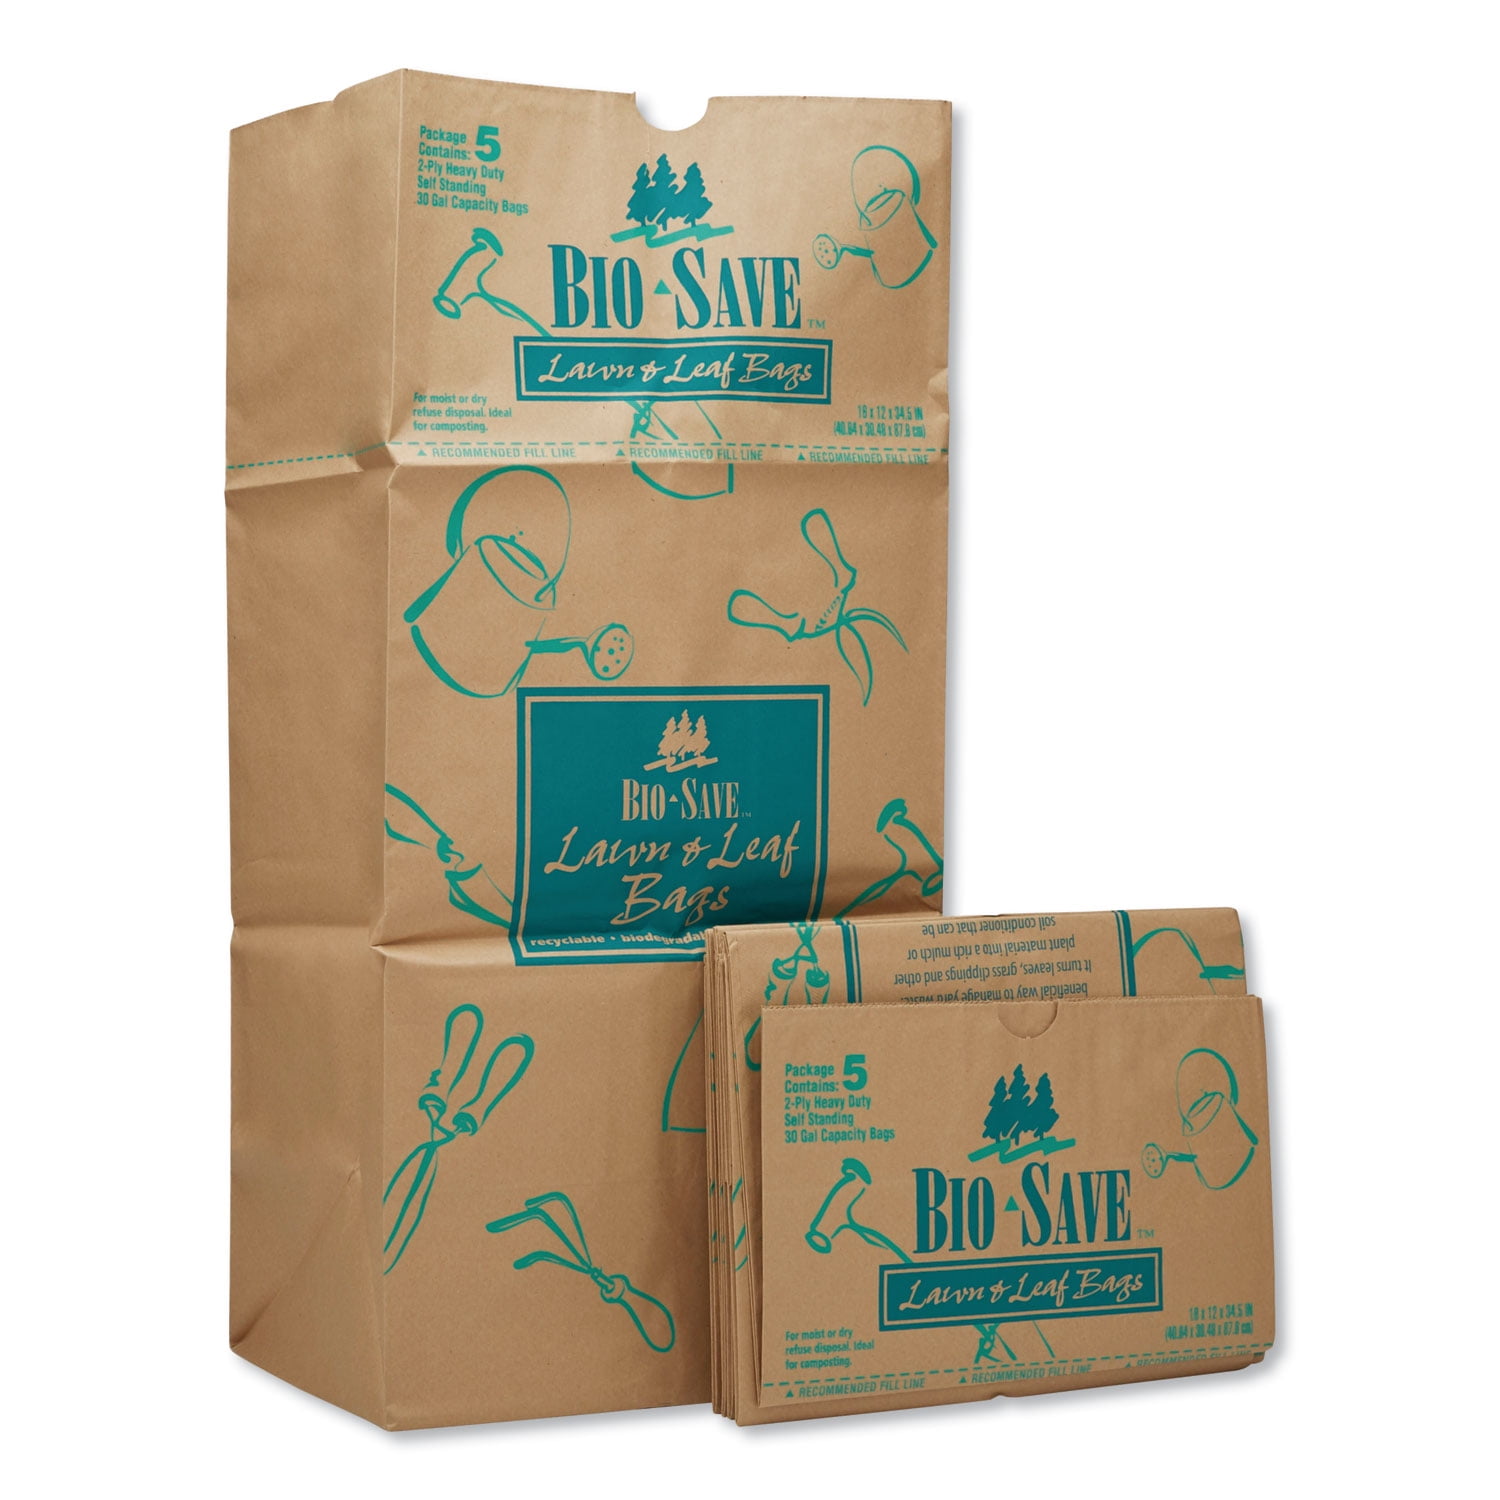 30 Gal. Paper Lawn and Leaf Bags - 20 Count, Biodegradable Yard